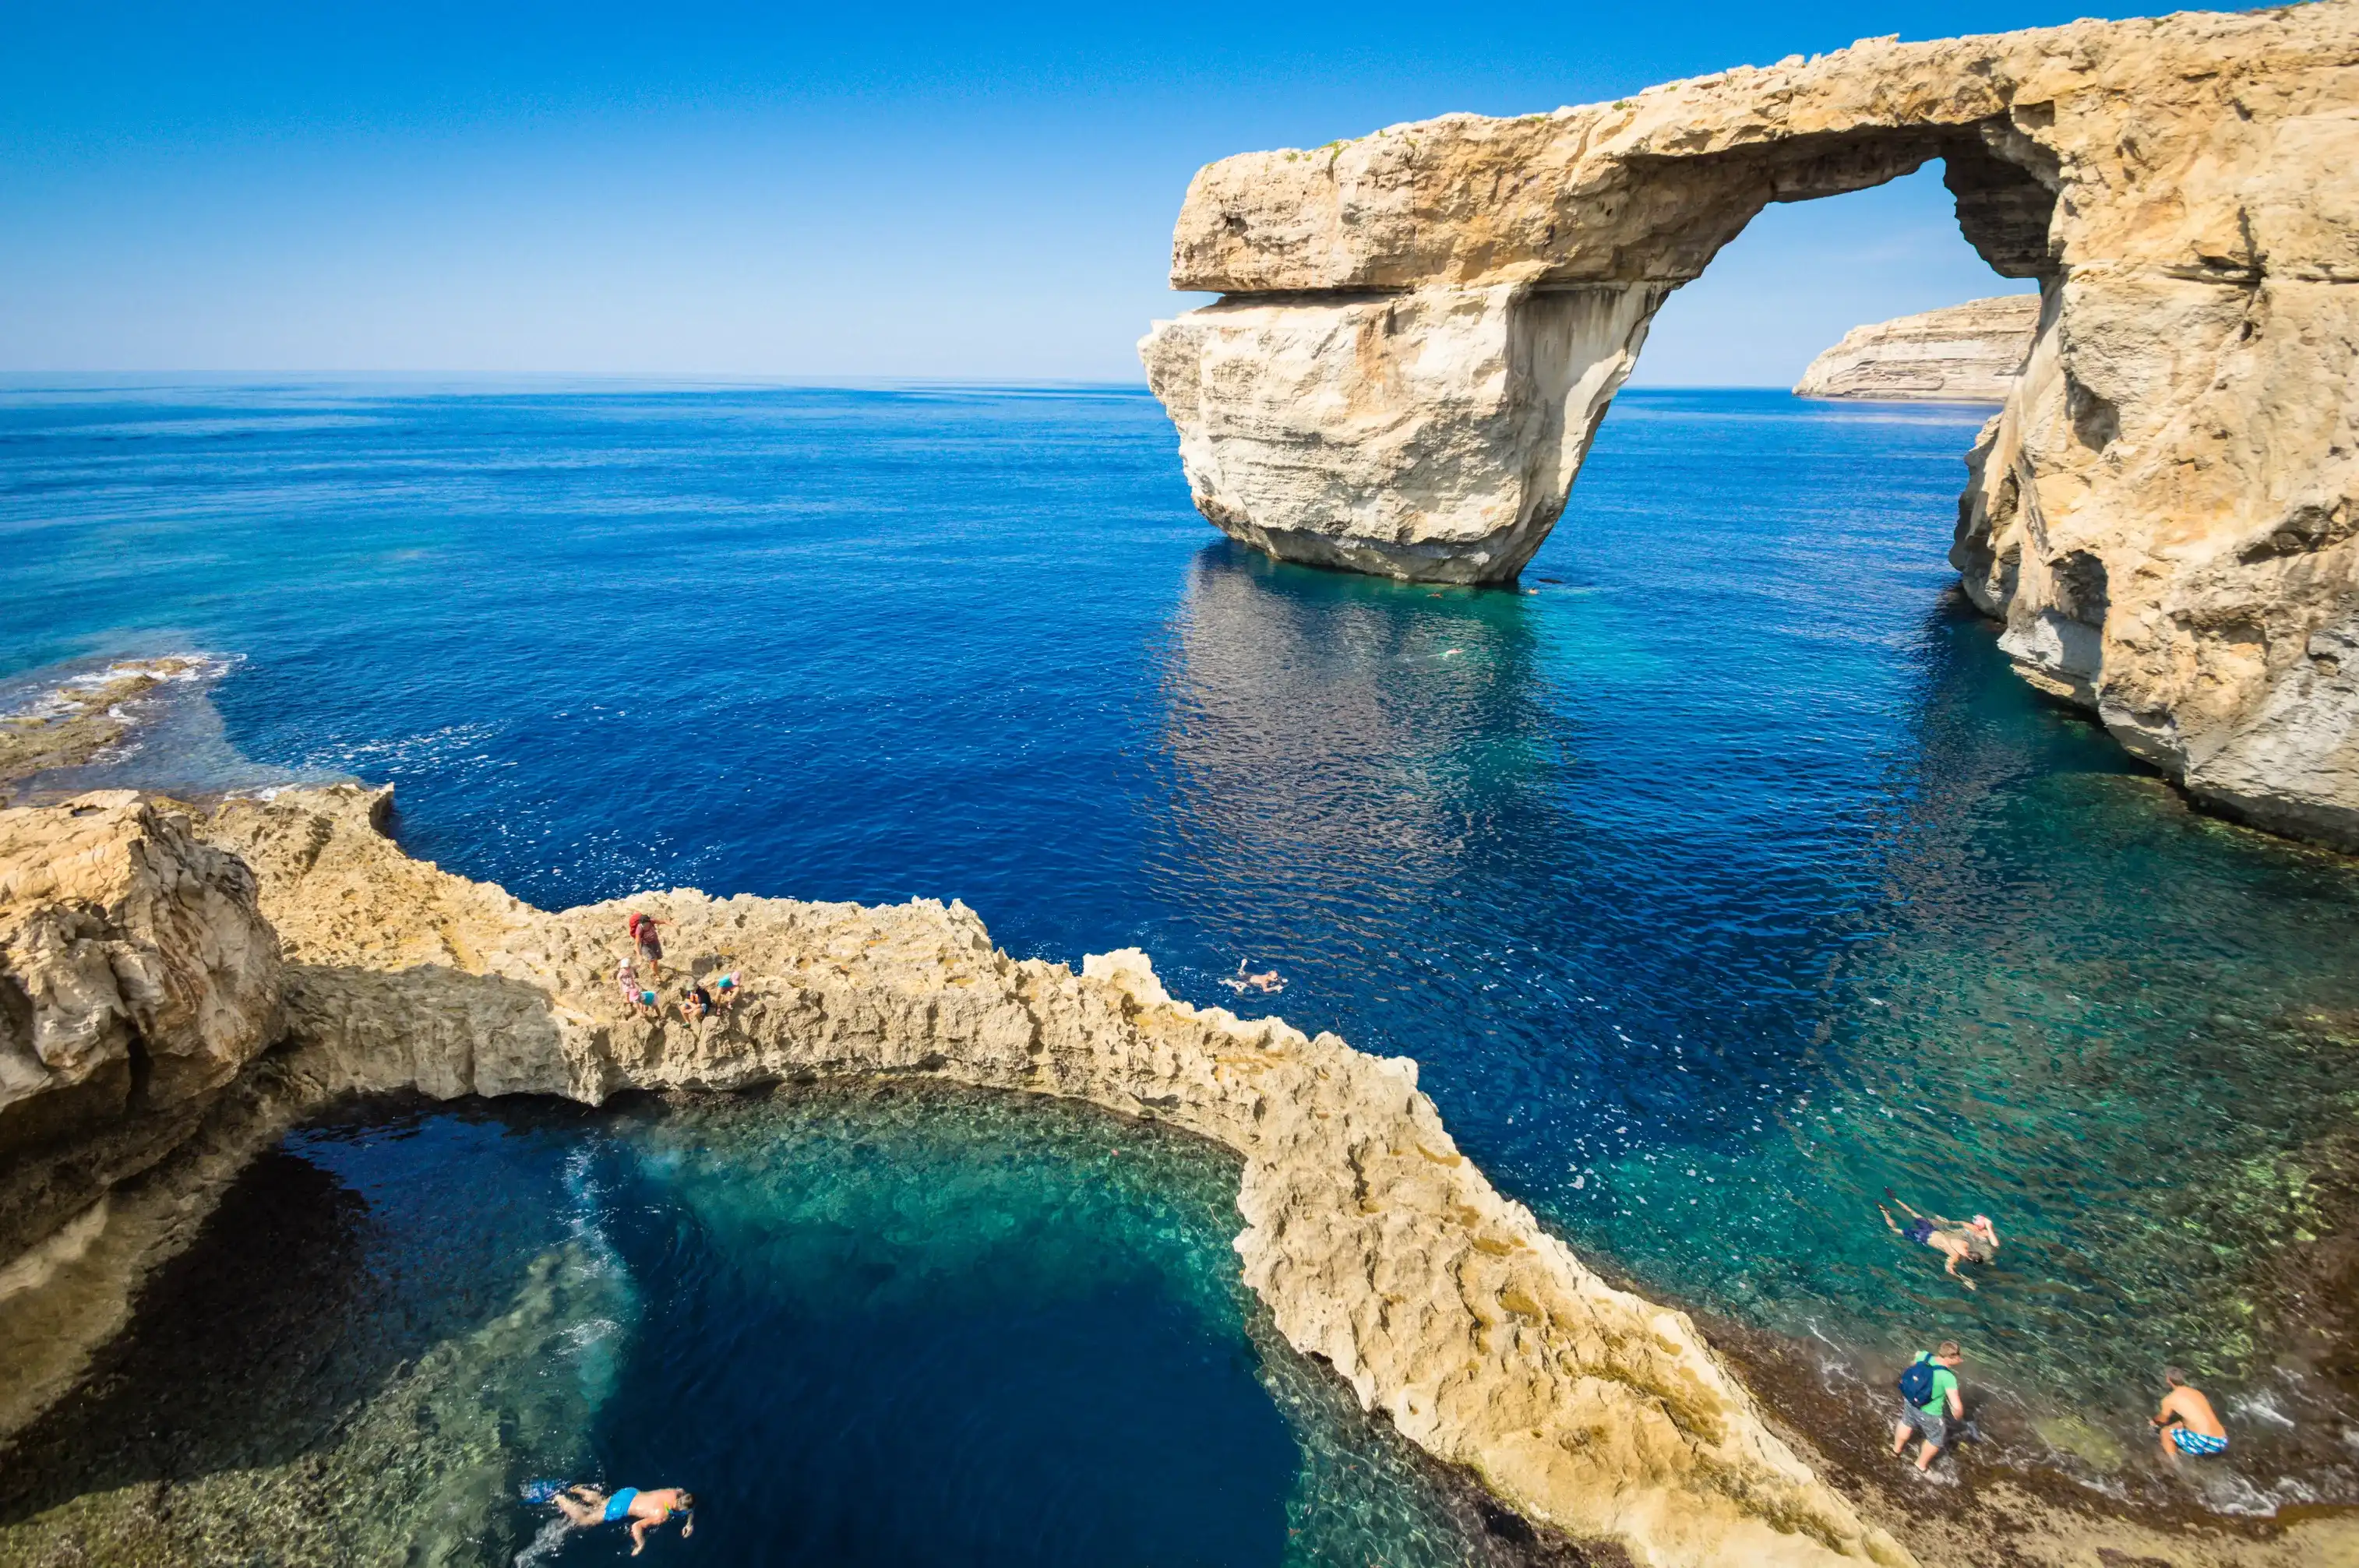 The Azure Window in Gozo island - Mediterranean nature wonder in beautiful Malta - Unrecognizable touristic scuba divers - World famous rock formation landmark collapsed after sea storm